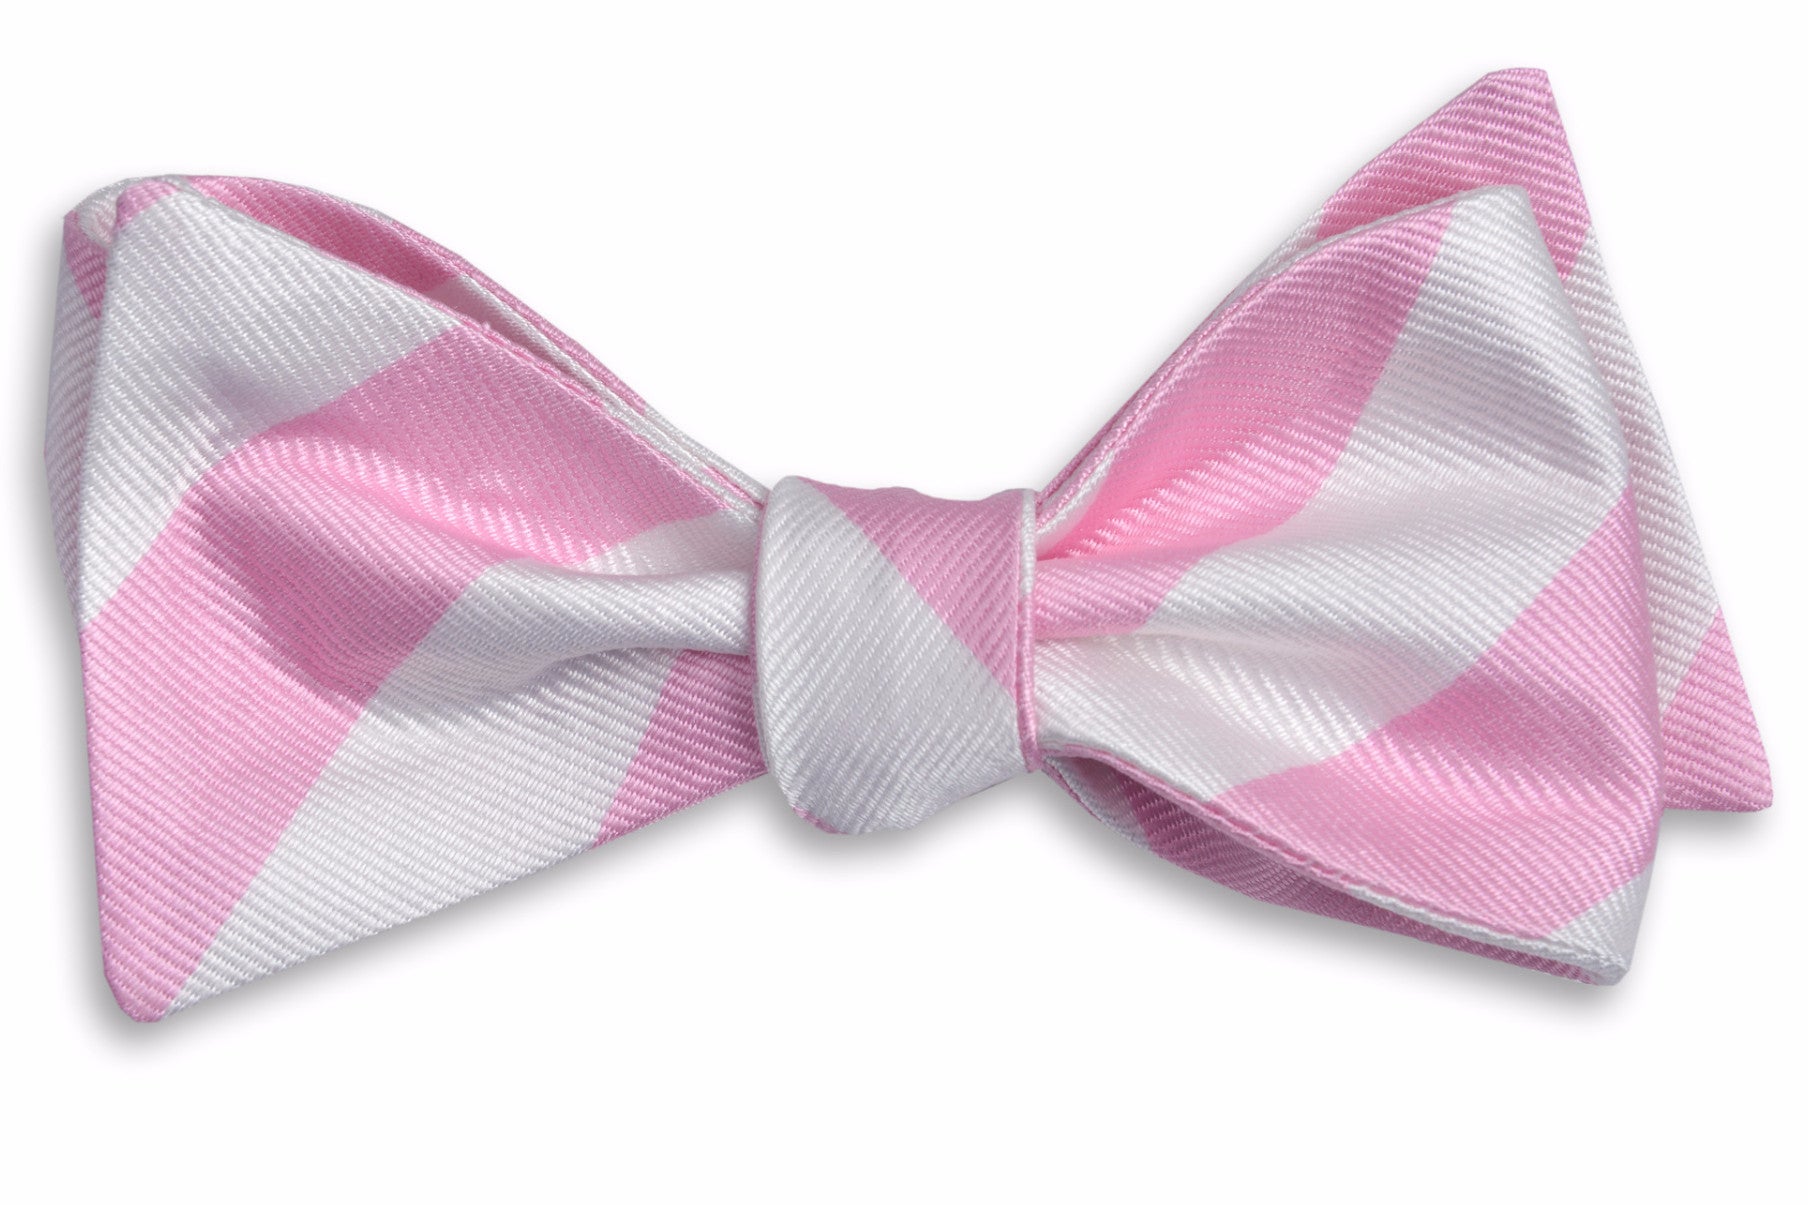 Men's pale pink bow tie. Made from 100% silk featuring white stripes.